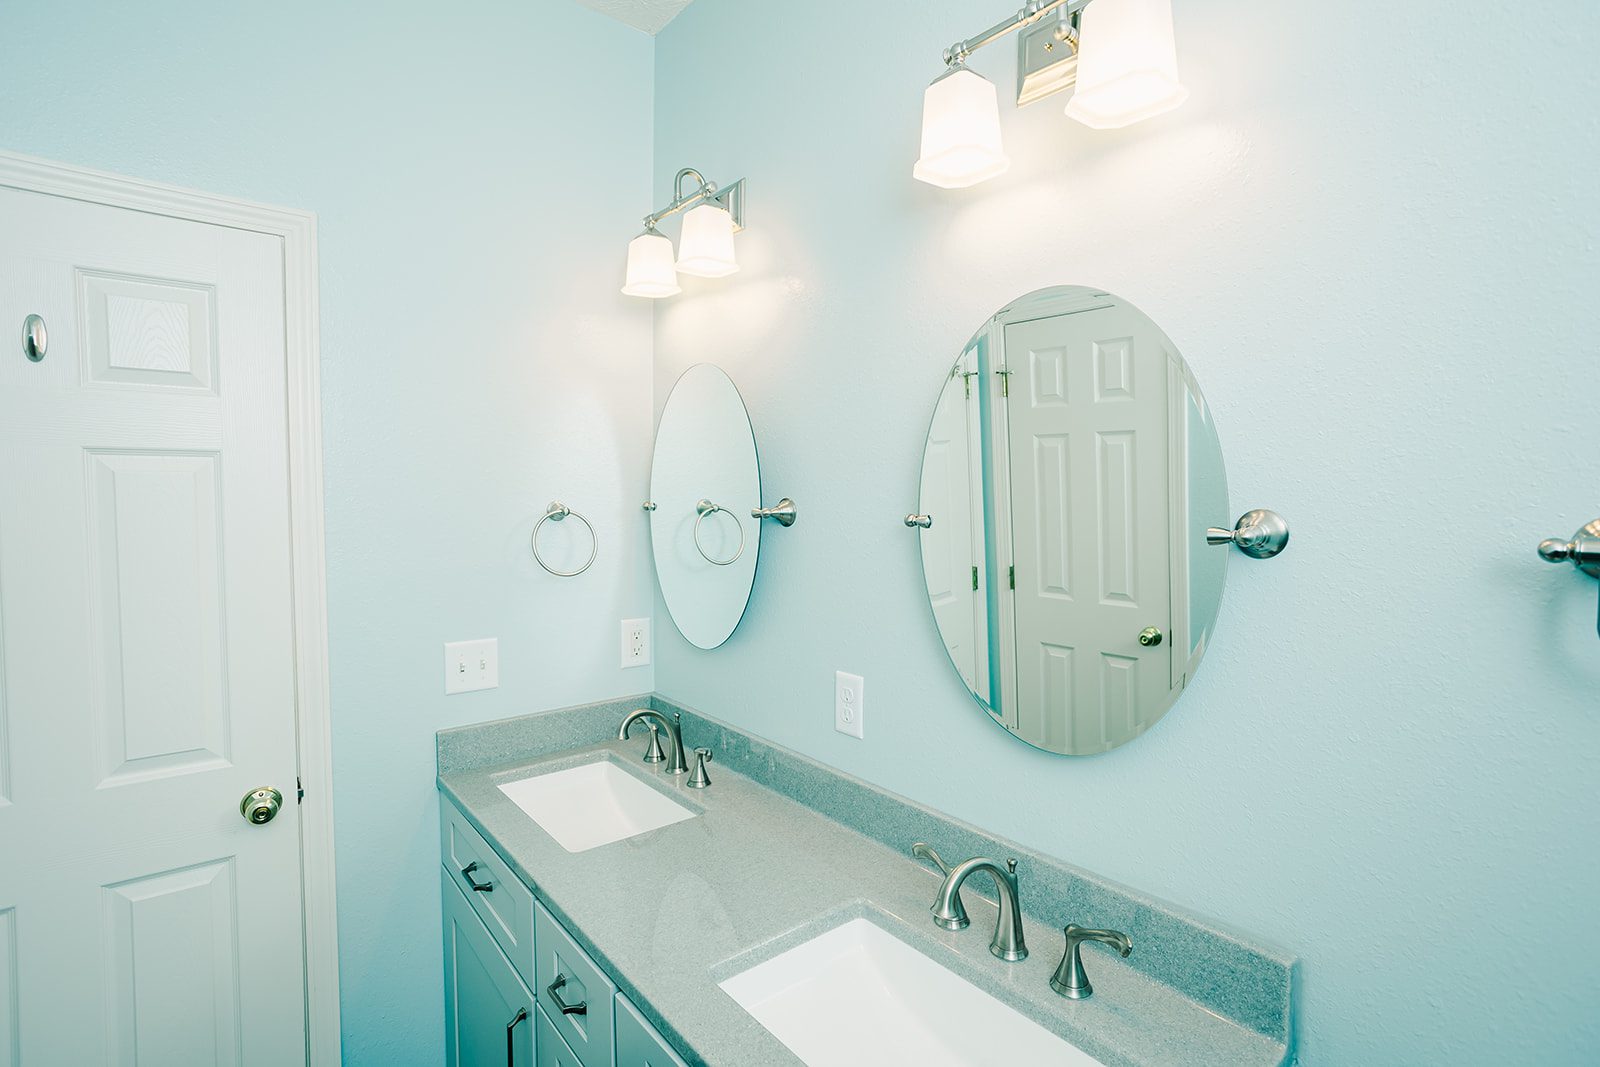 coors can remodel blusterdrive bathroom mirrors